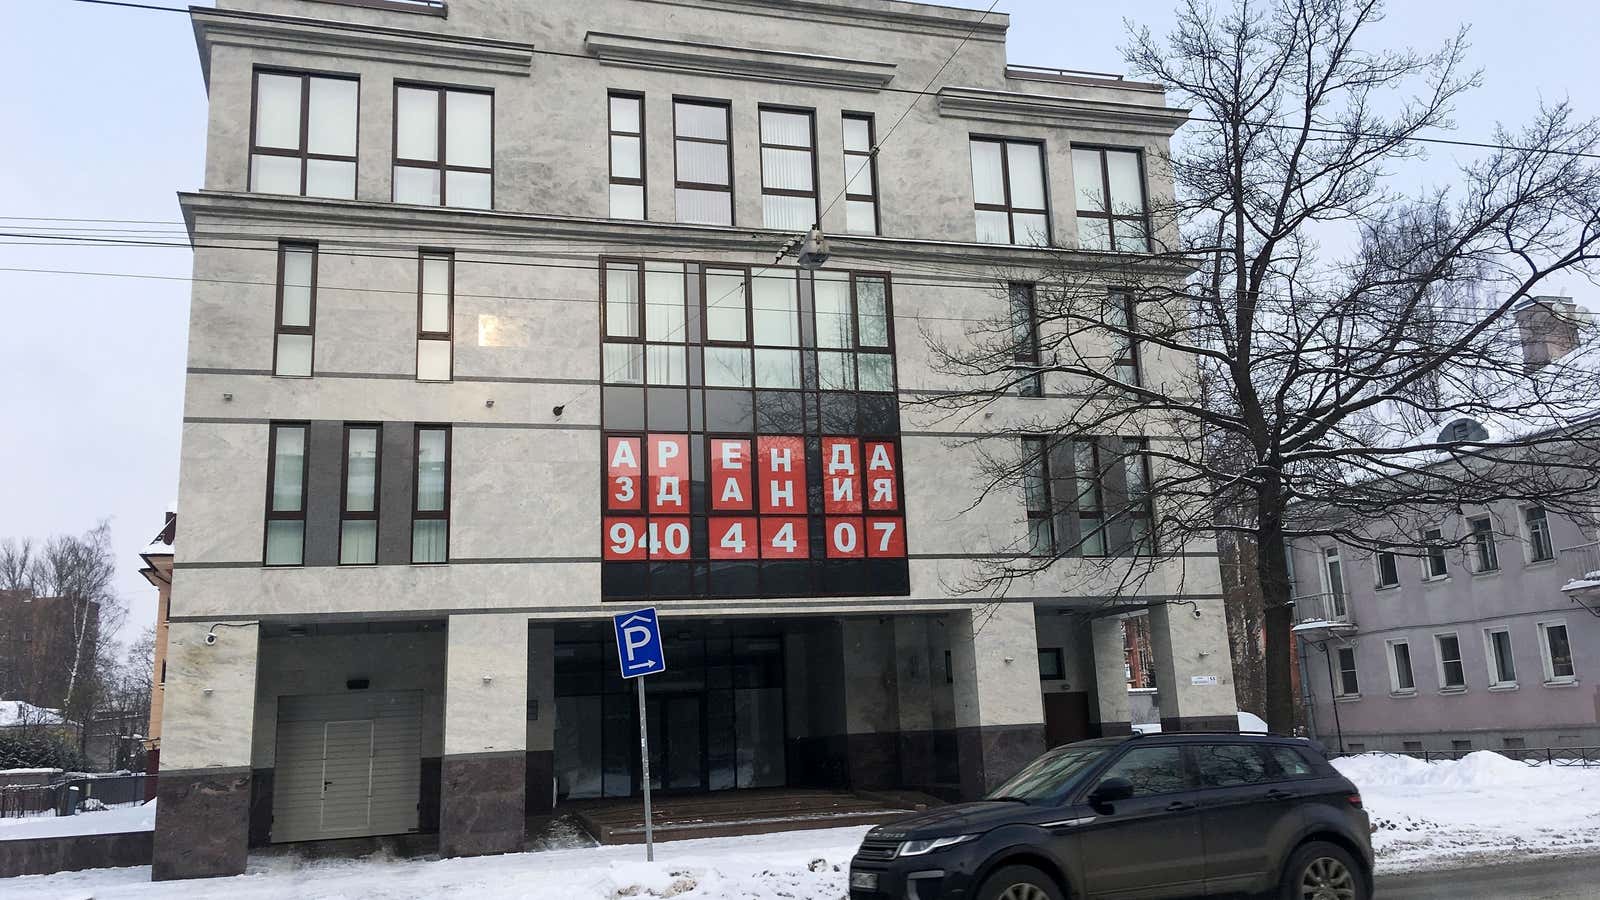 The Russian troll factory.